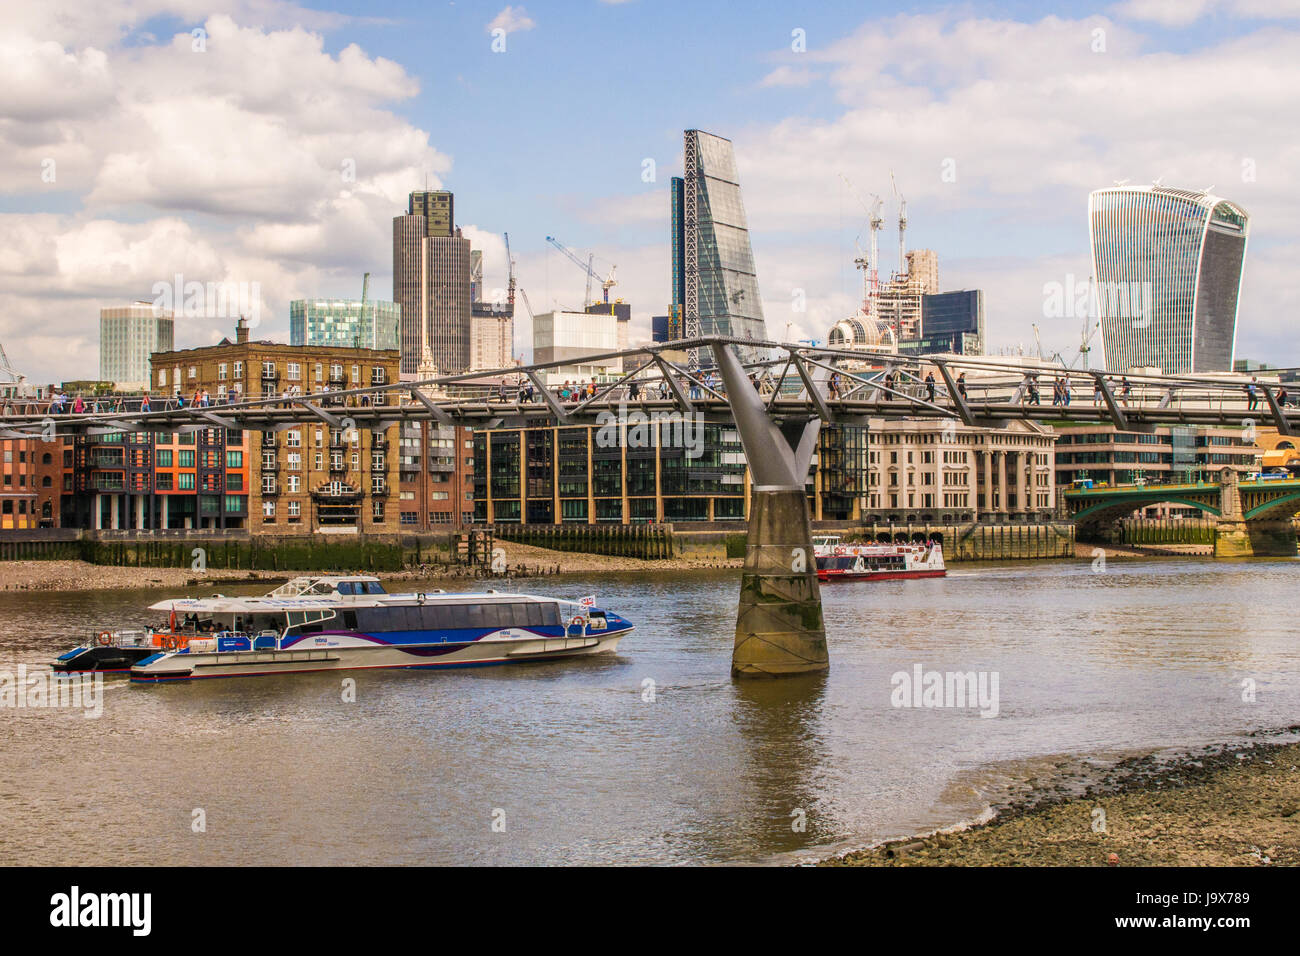 Millennium Bridge across the River Thames, London, with the 'Cheese Grater' (middle) & 'Walkie Talkie' (right) skyscrapers behind. Stock Photo